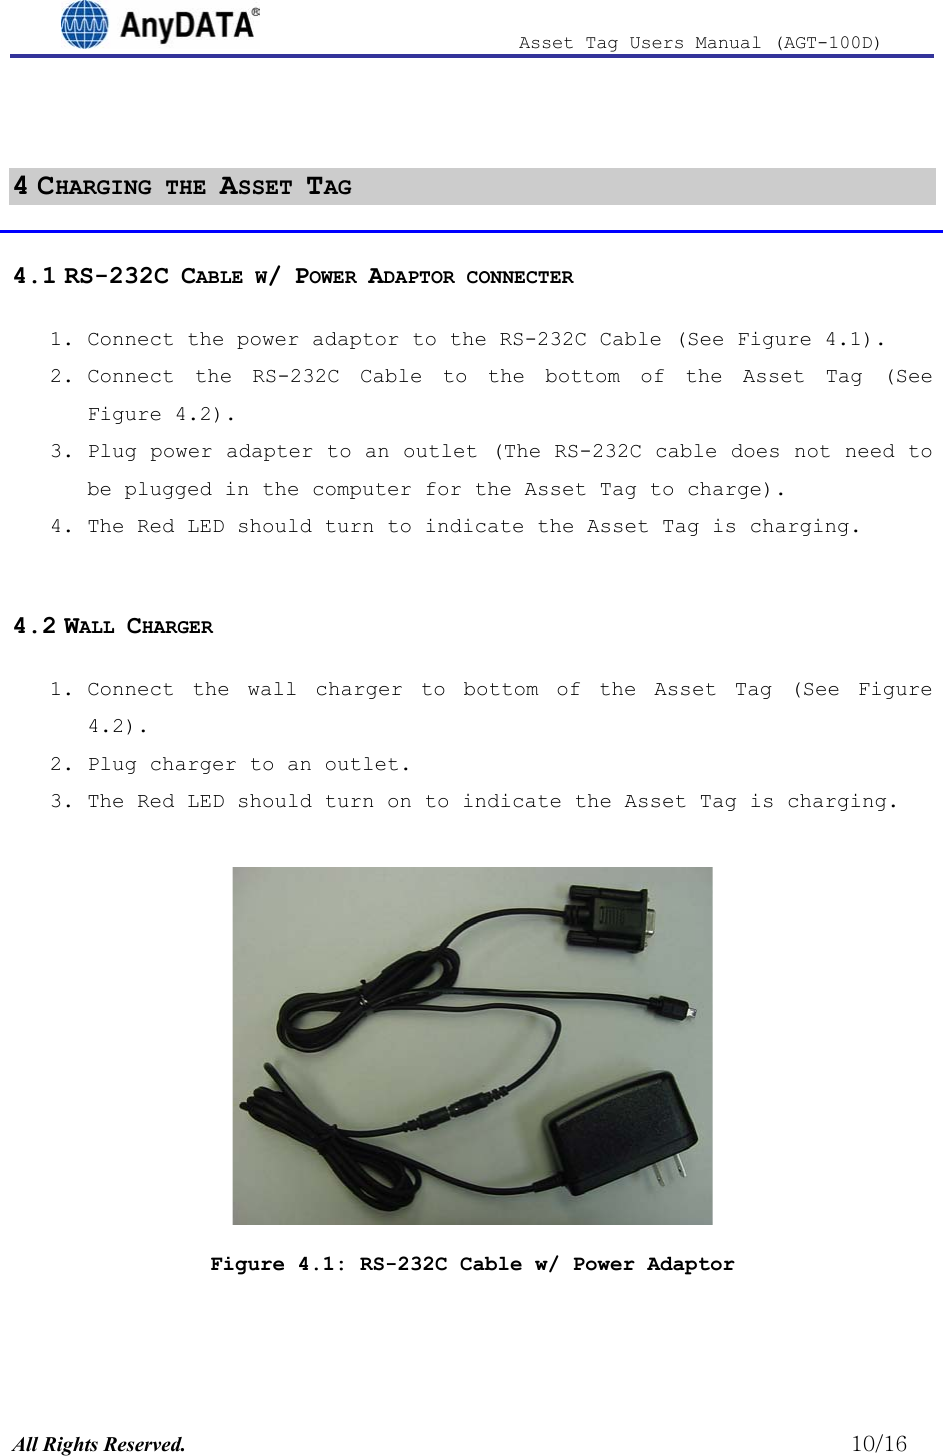                              Asset Tag  Users  Manual  (AGT-100D)   4 CHARGING THE ASSET TAG 4.1 RS-232C CABLE W/ POWER ADAPTOR CONNECTER 1. Connect the power adaptor to the RS-232C Cable (See Figure 4.1).  2. Connect the RS-232C Cable to the bottom of the Asset Tag (See ).  Figure 4.2Figure 4.23. Plug power adapter to an outlet (The RS-232C cable does not need to be plugged in the computer for the Asset Tag to charge). 4. The Red LED should turn to indicate the Asset Tag is charging.  4.2 WALL CHARGER 1. Connect the wall charger to bottom of the Asset Tag (See ).  2. Plug charger to an outlet. 3. The Red LED should turn on to indicate the Asset Tag is charging.   Figure 4.1: RS-232C Cable w/ Power Adaptor  All Rights Reserved.                                                          10/16 